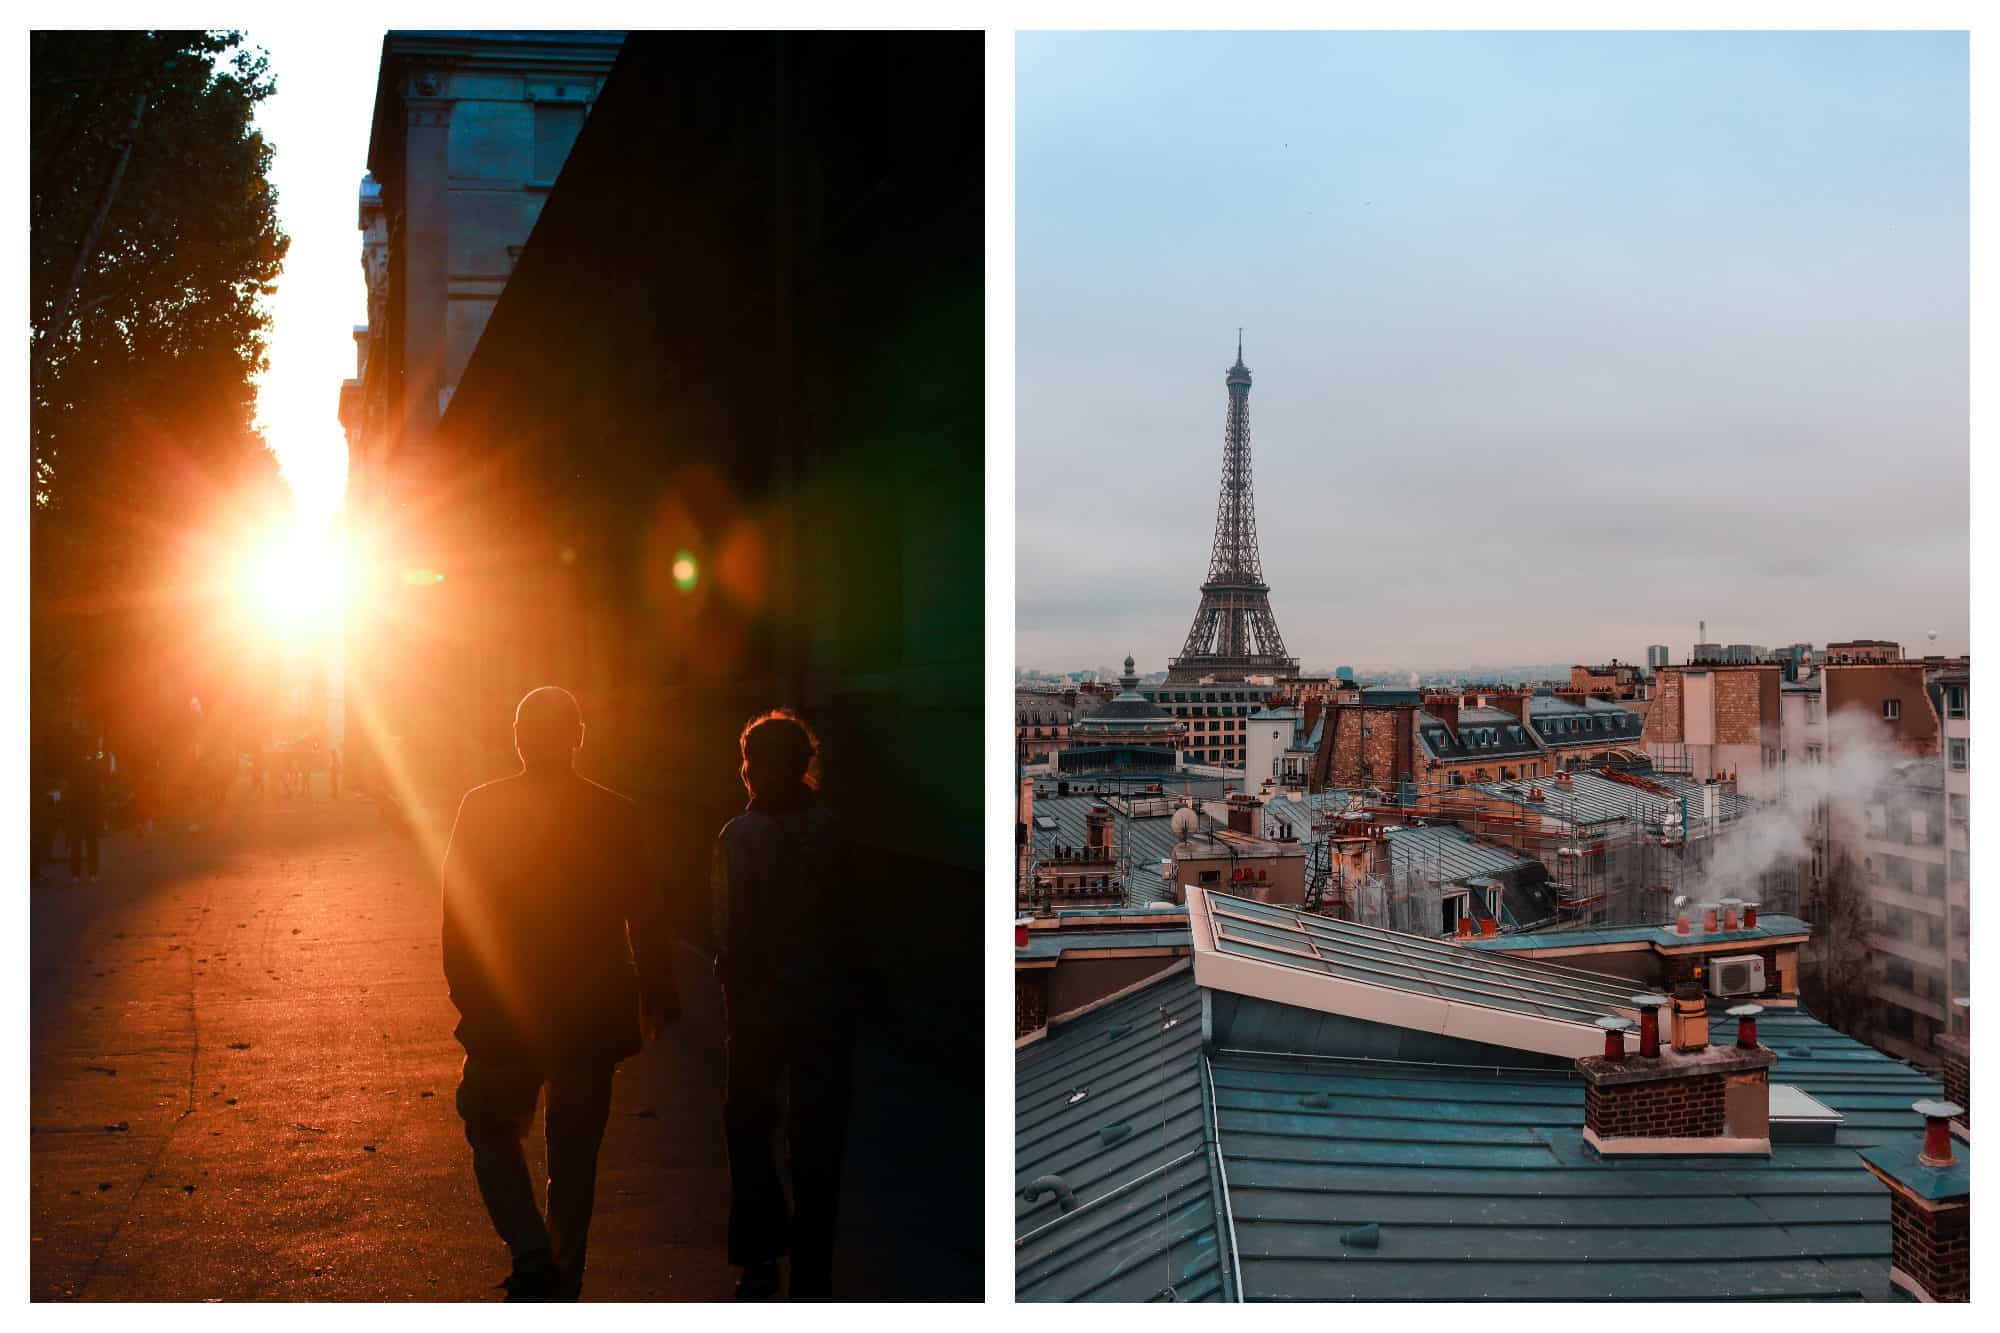 A couple strolling the streets of Paris at sunset (left). The Paris rooftops with the Eiffel Tower in the background (right).